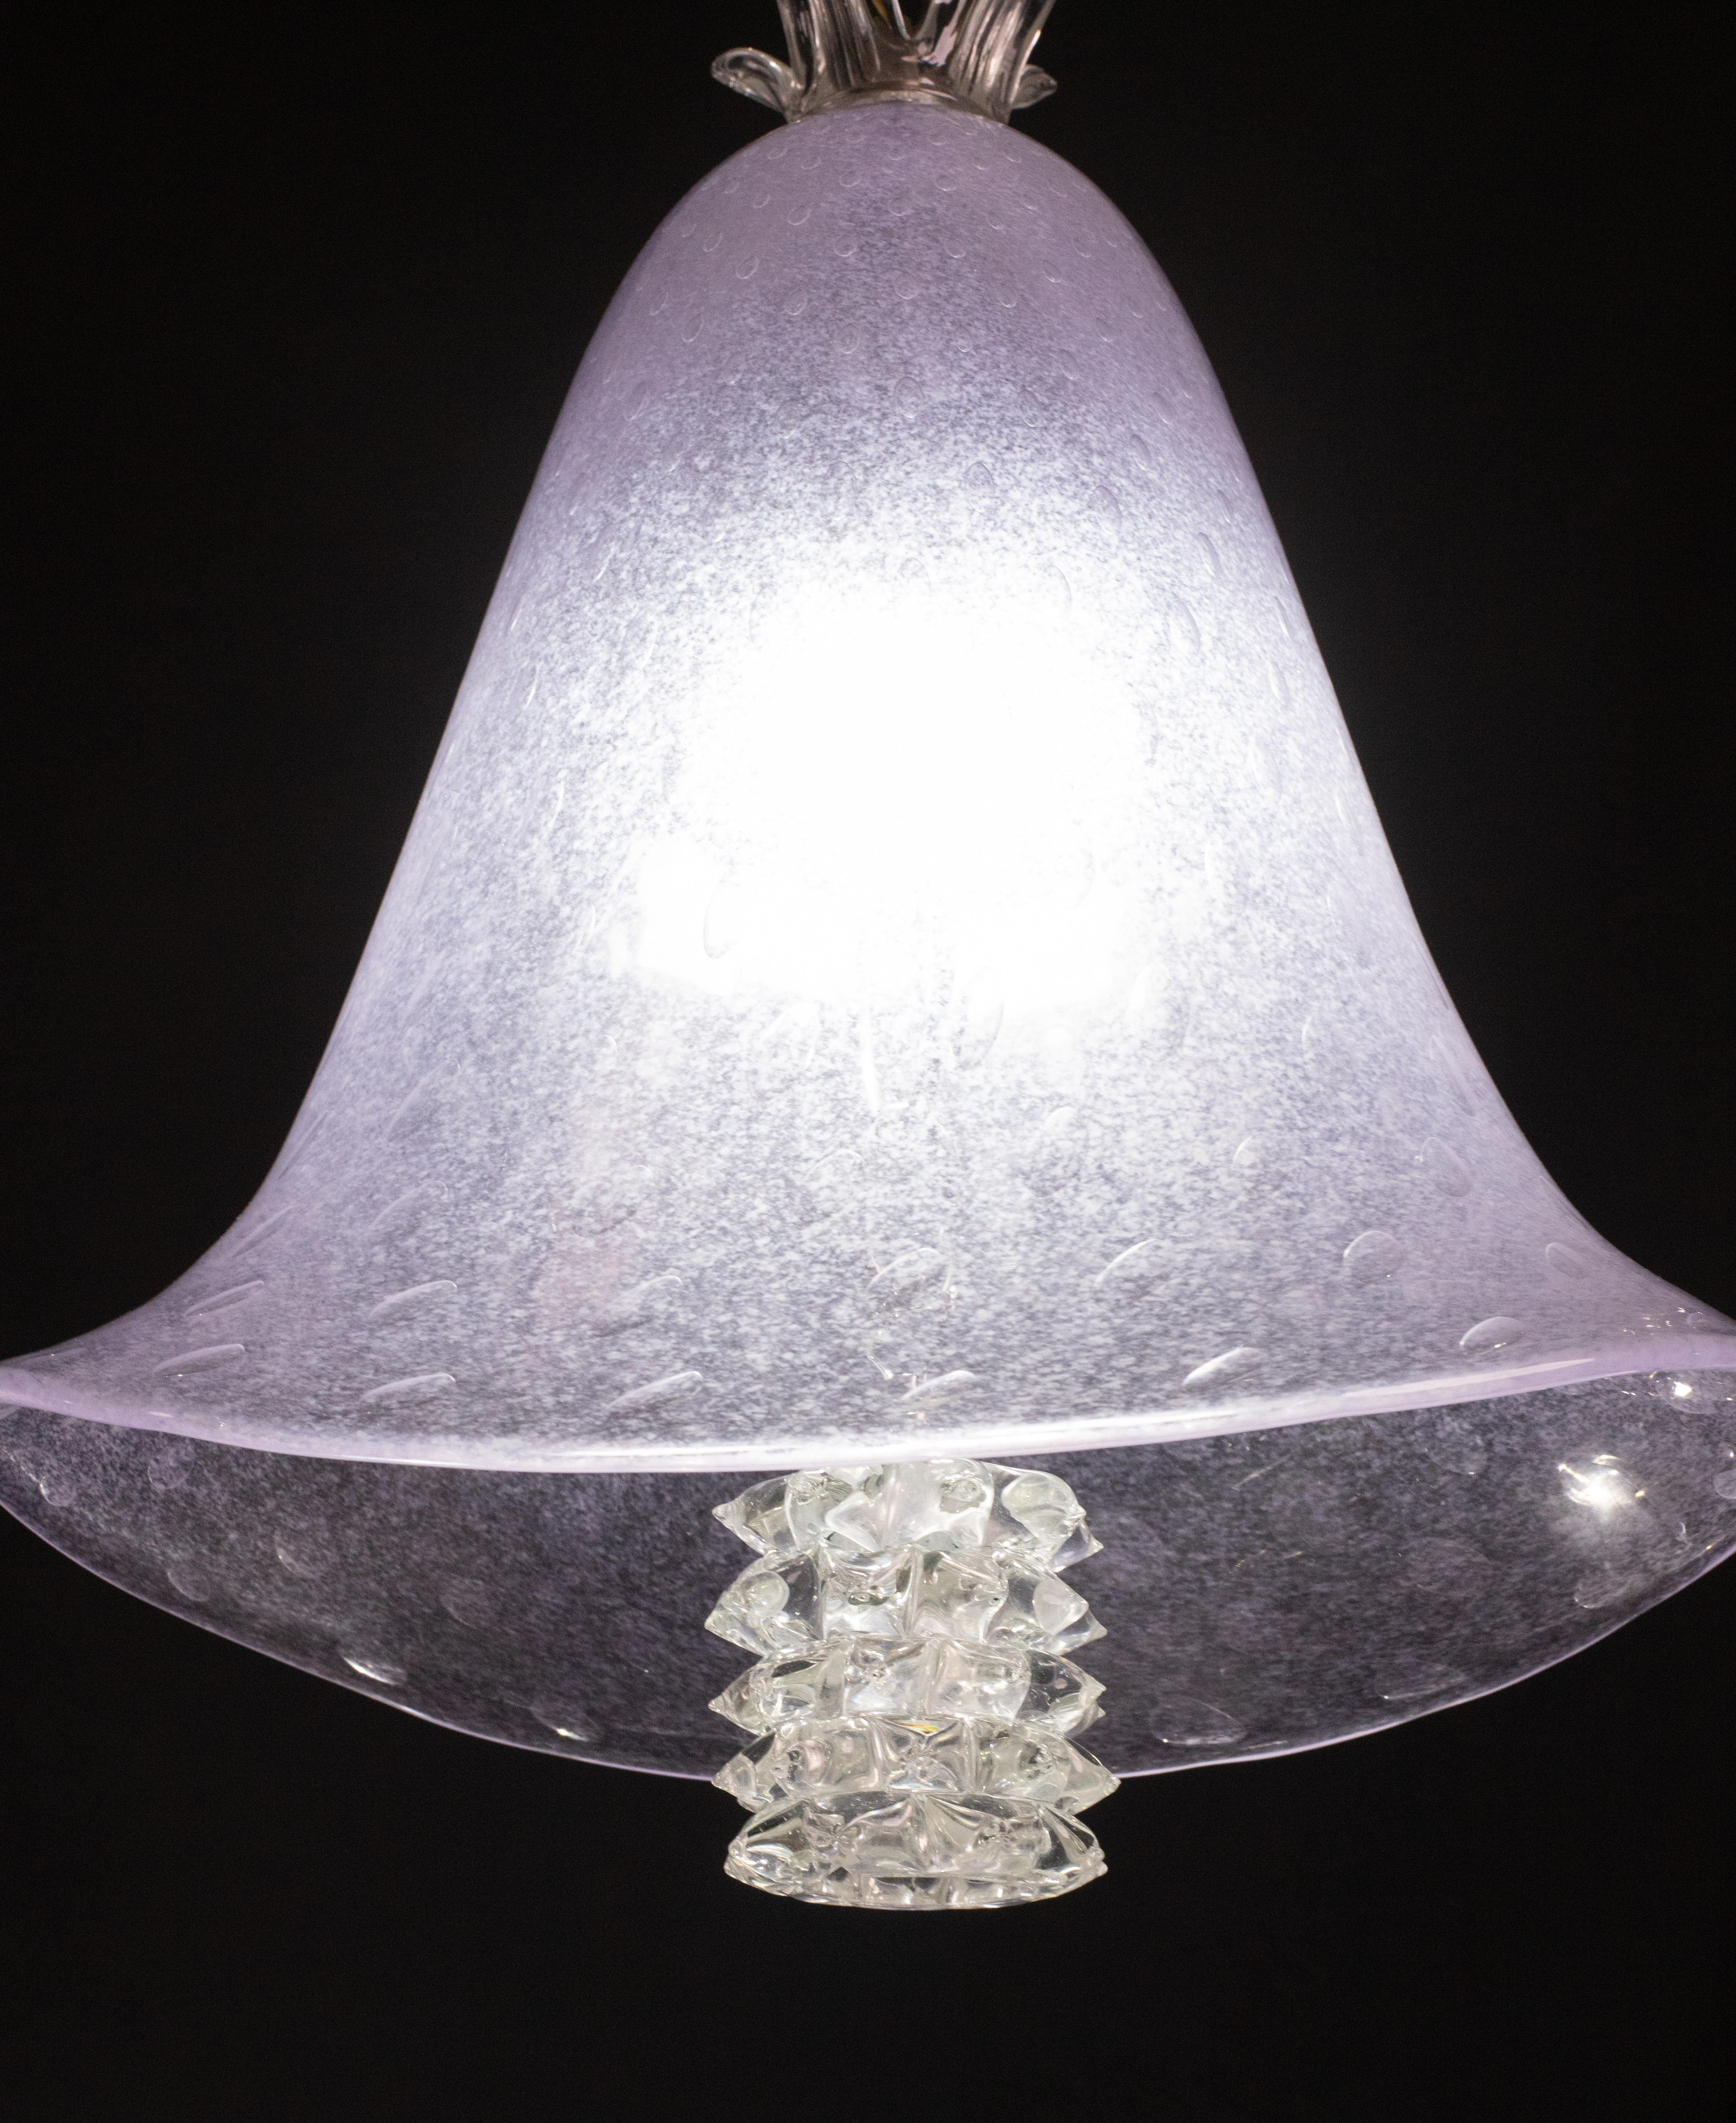 Elegant Barovier e Toso Lantern in Bubble Glass with a Rostrato glass element In Good Condition For Sale In Roma, IT